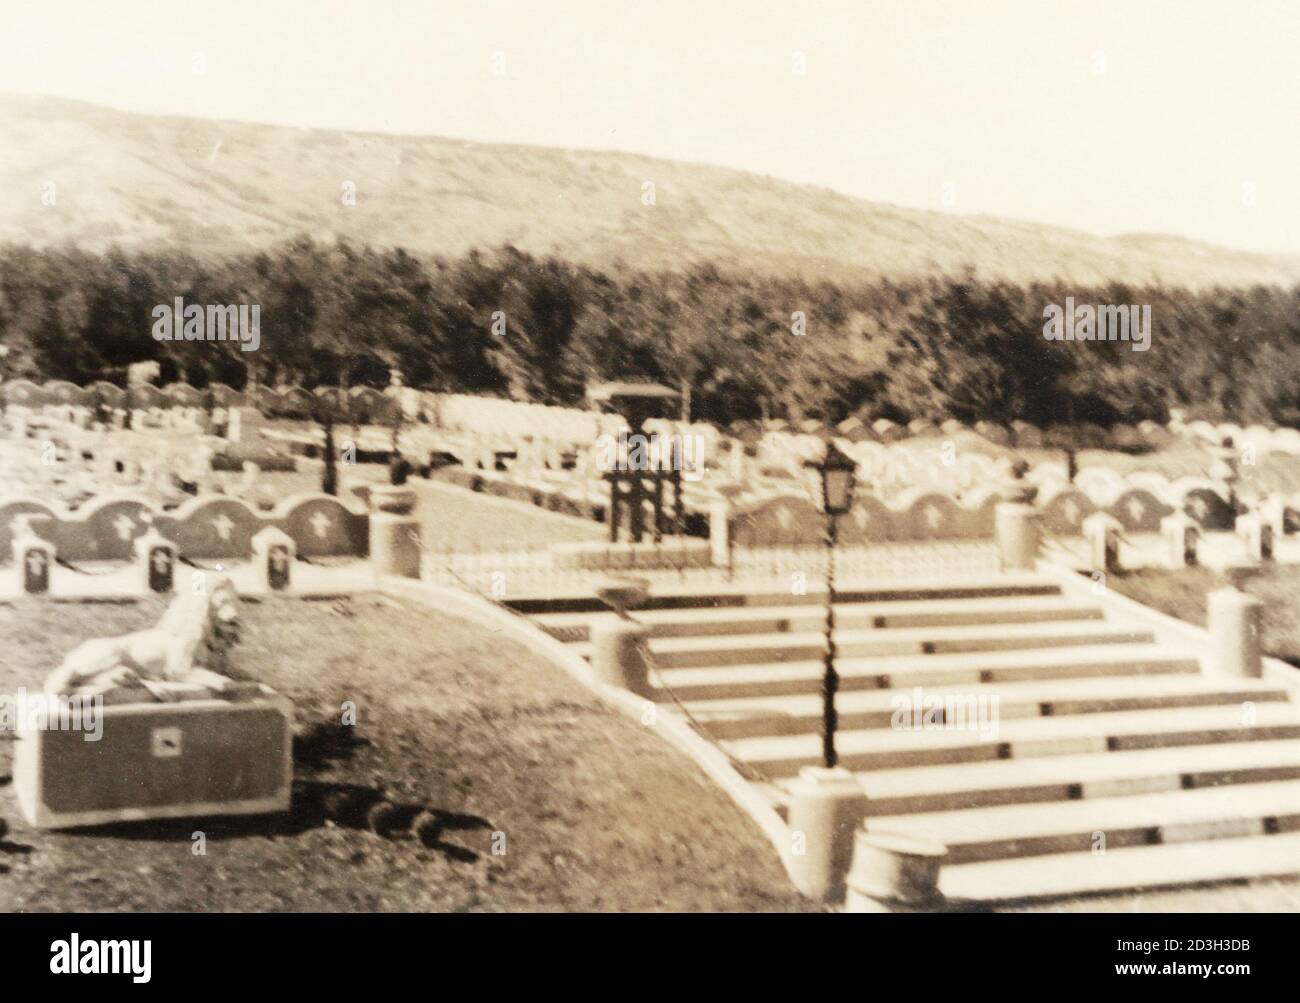 Cemetery of German soldiers during the World War II. Stock Photo